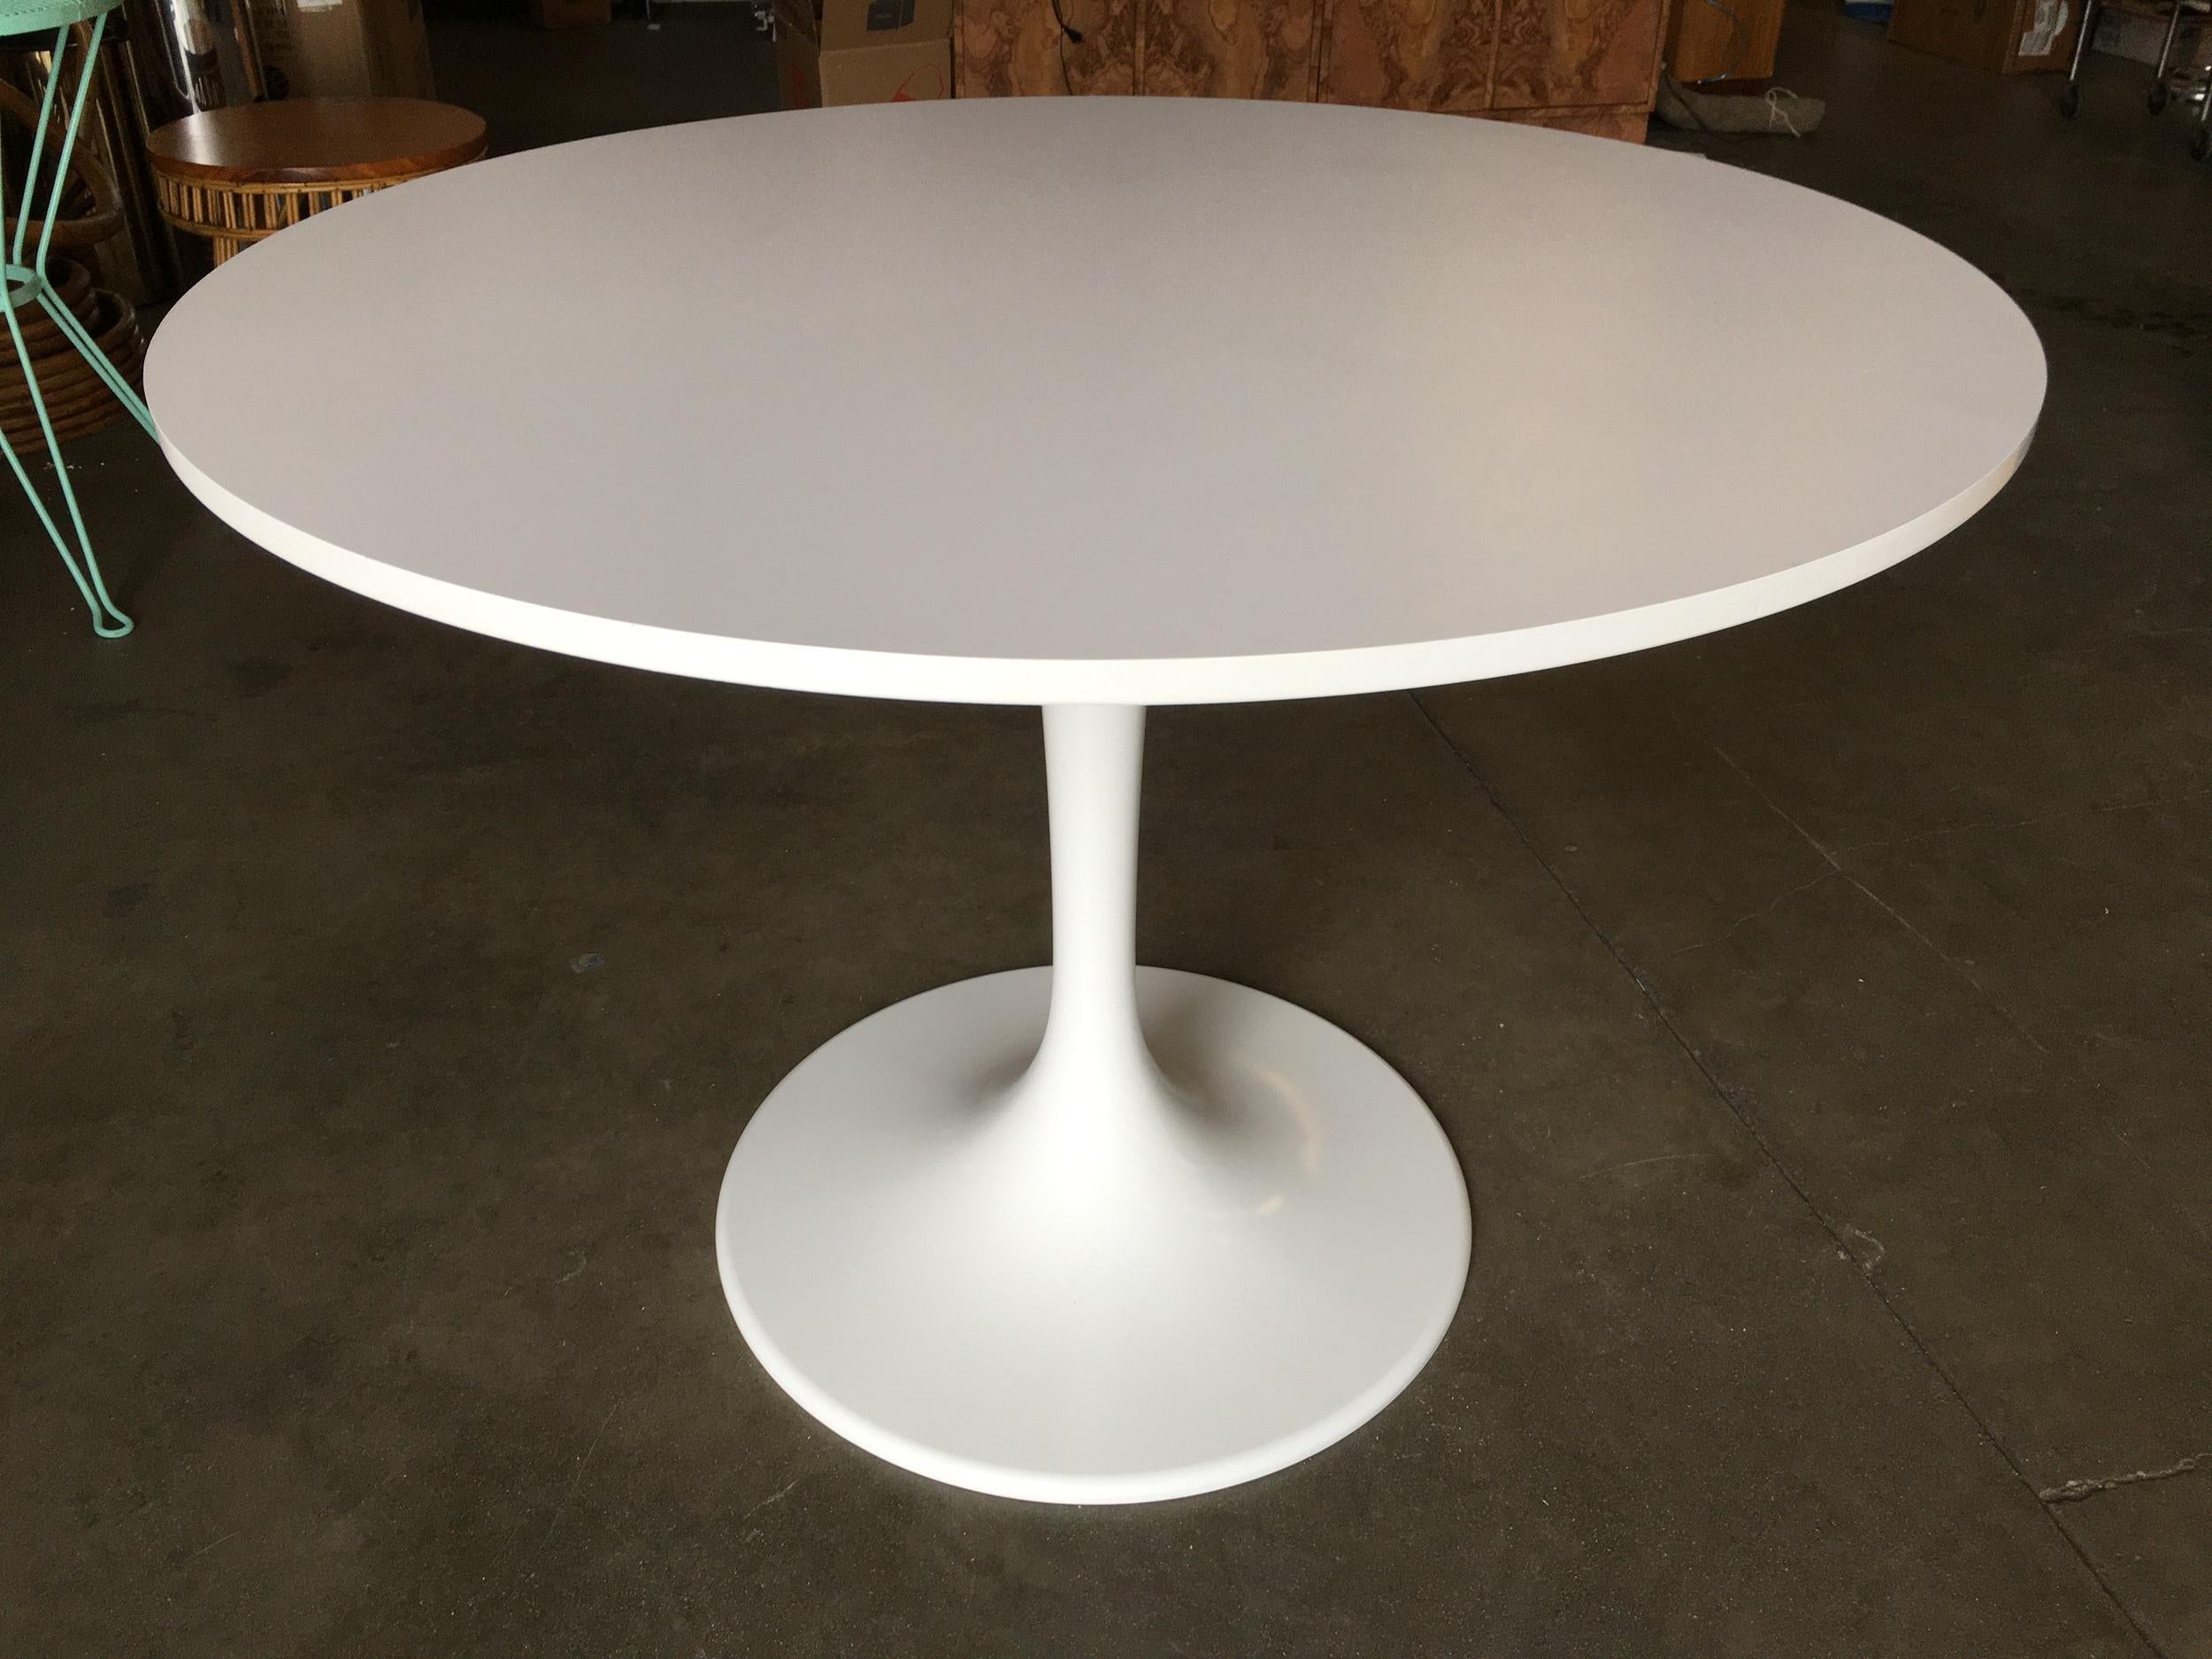 Mid-20th Century Round Tulip Dining Table Designed by Eero Saarinen for Knoll